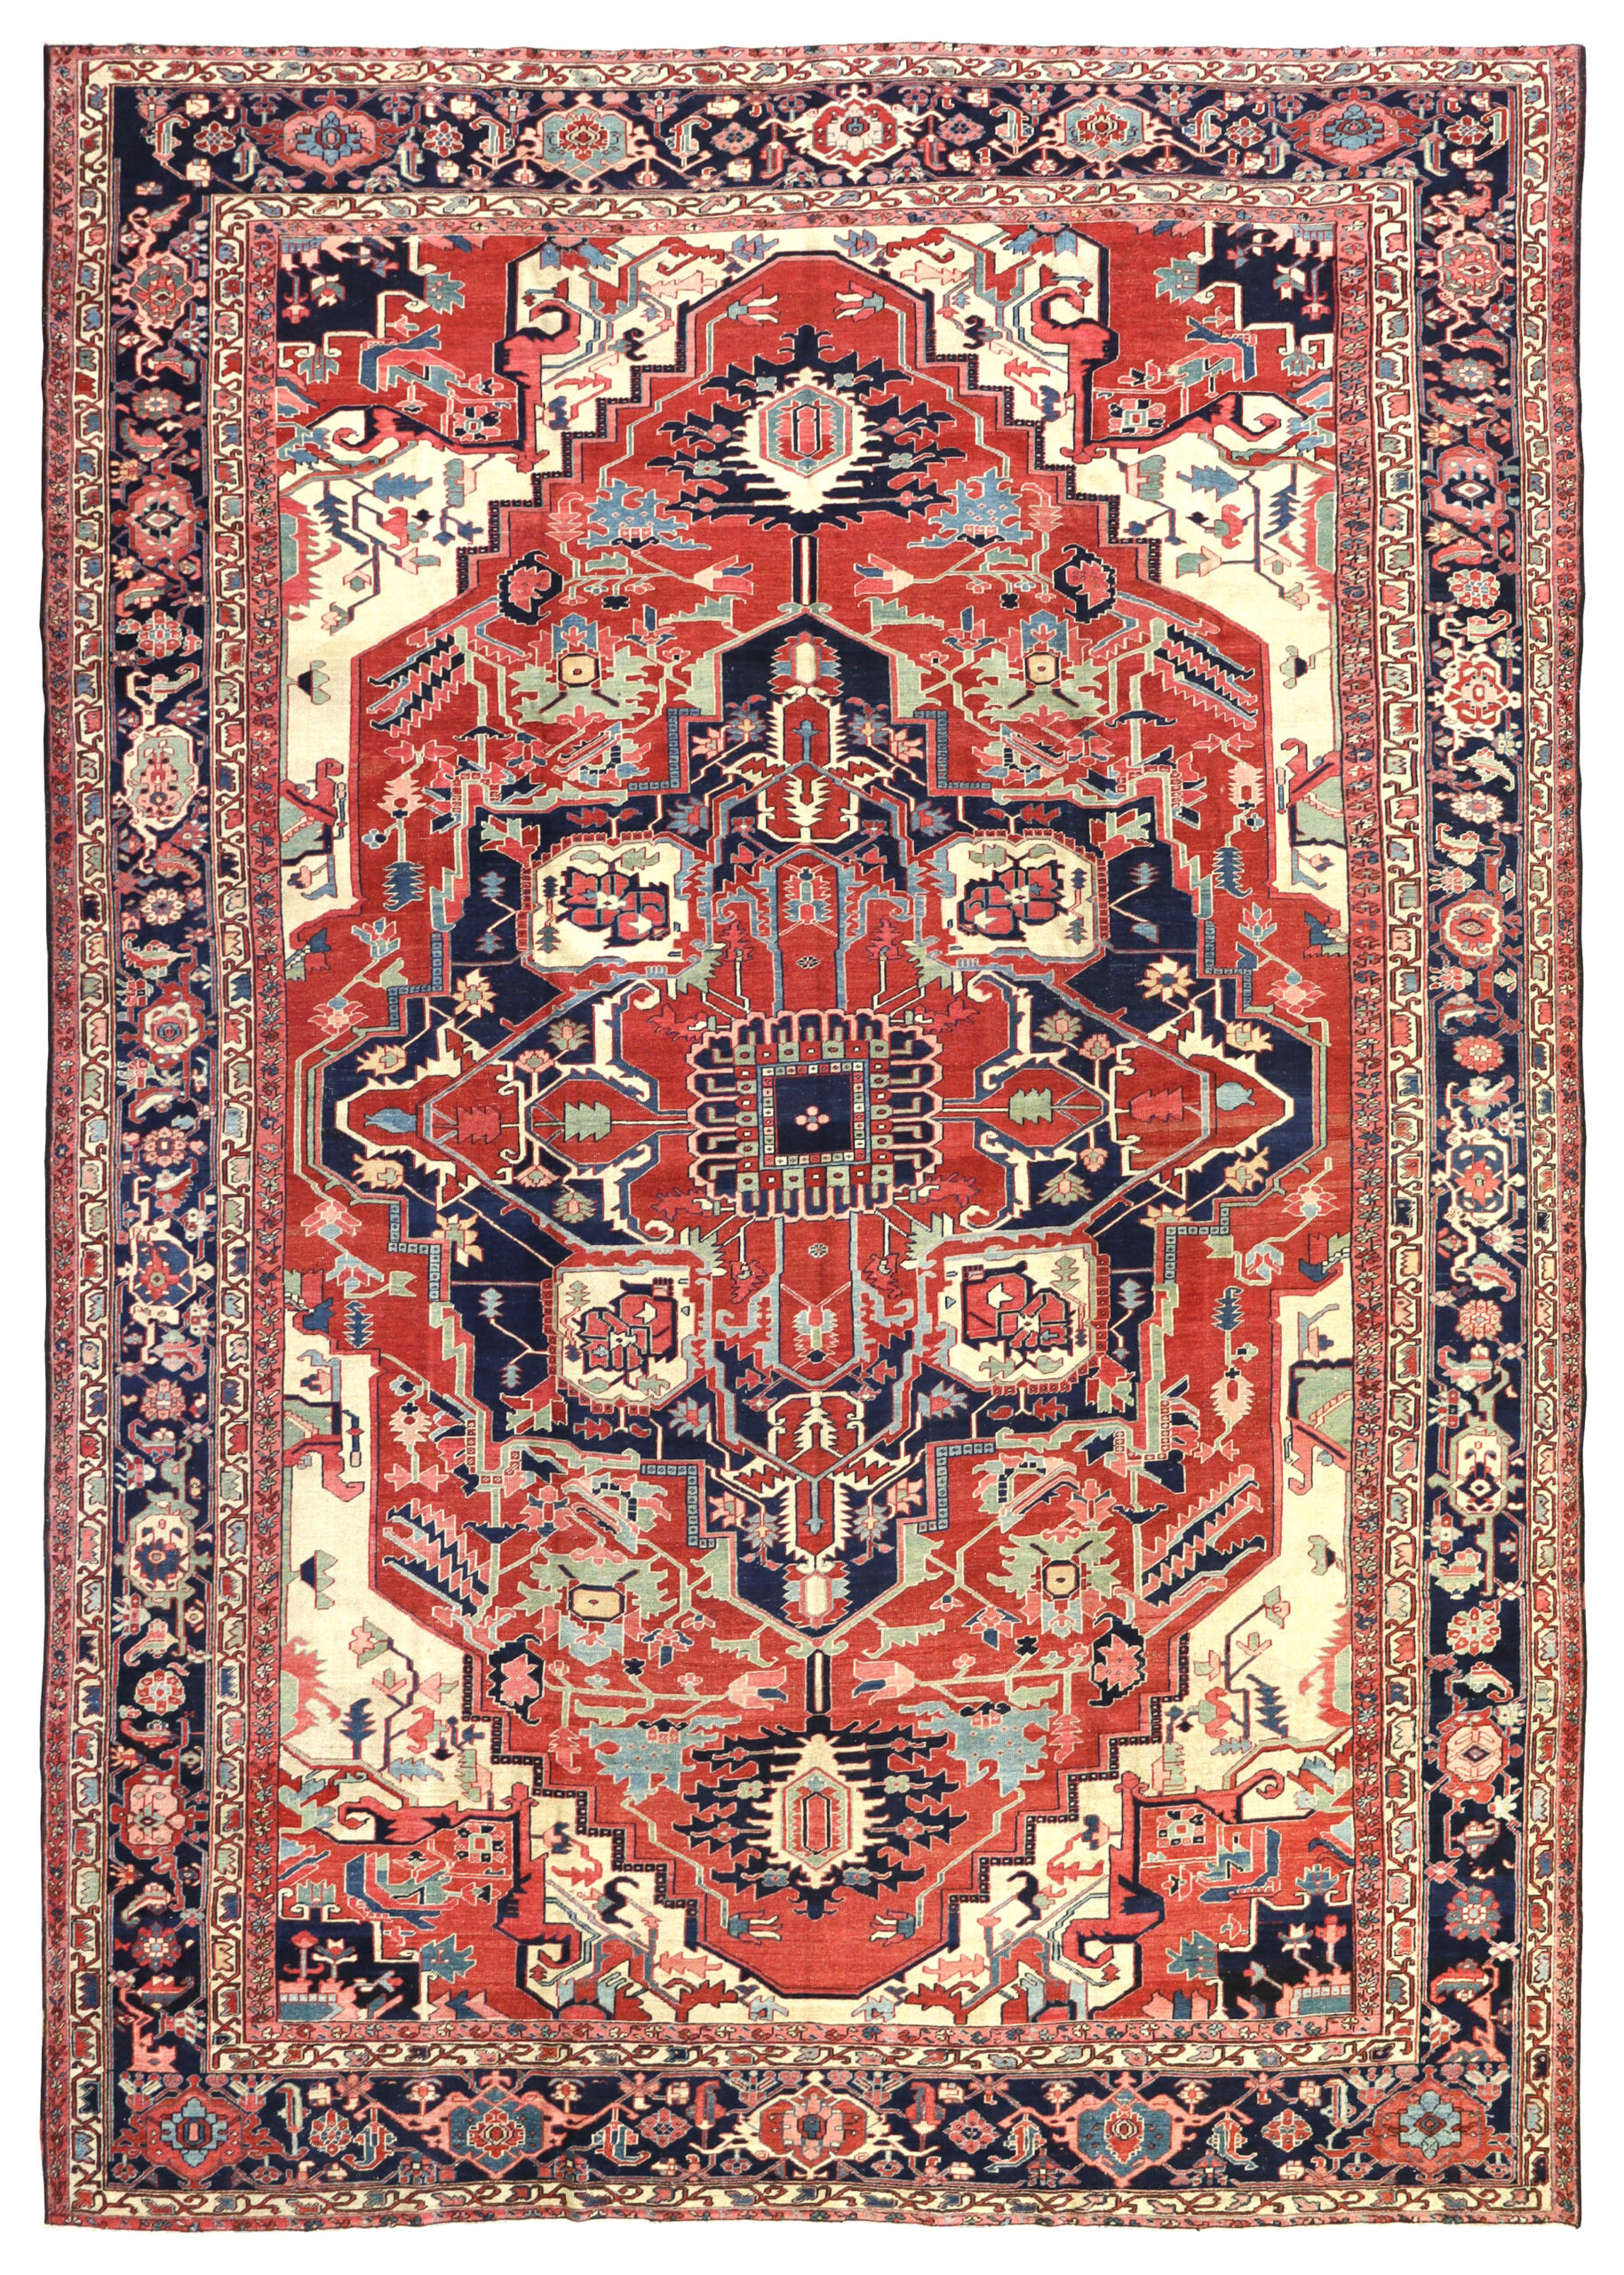 A large antique Persian Heriz Serapi carpet with a navy blue medallion decorating a deep salmon color field that is framed by ivory corner spandrels and a navy blue Turtle design border, northwest Persia, Azerbaijan province, circa 1890 - Douglas Stock Gallery, antique Persian carpets Boston, Cambridge, Belmont, Lexington, Concord, Weston, Newton, Brookline, Wellesley, South Natick,MA area antique Oriental rugs